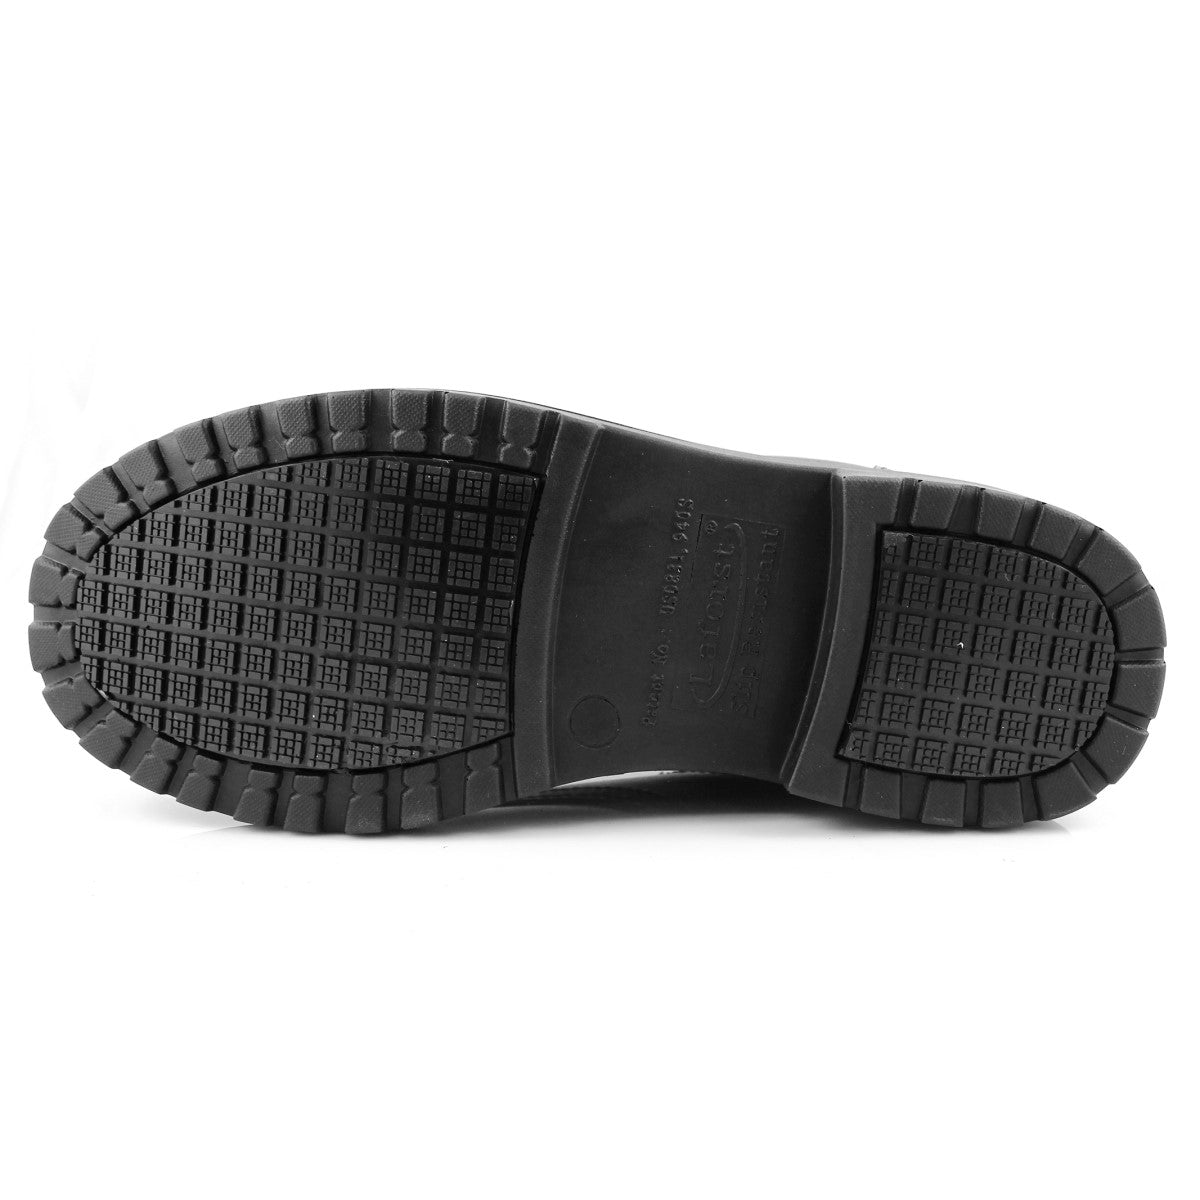 Gater 9420-01 / Composite Safety Toe